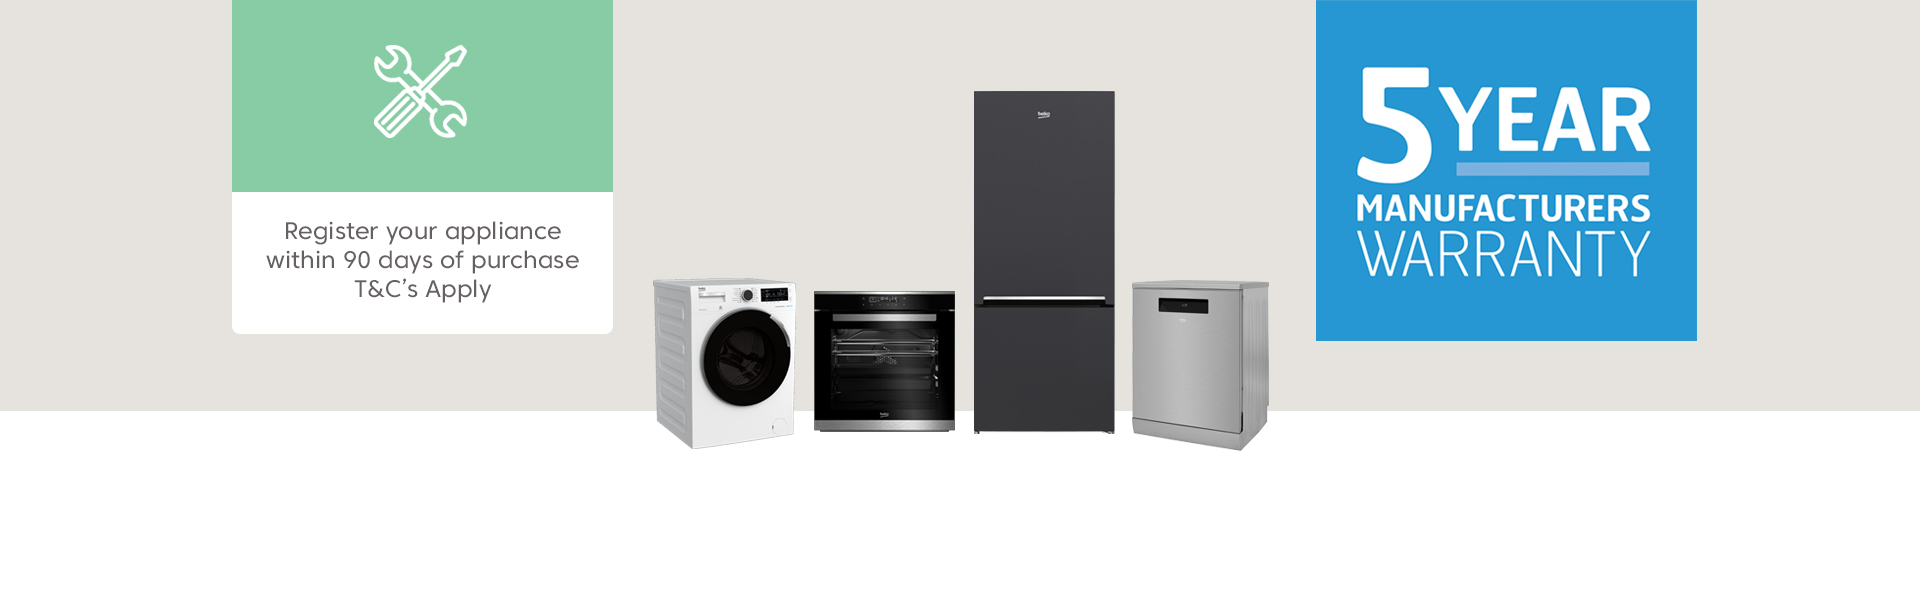 Buy The Admirable Home Appliance Online At Unbeatable Low Prices